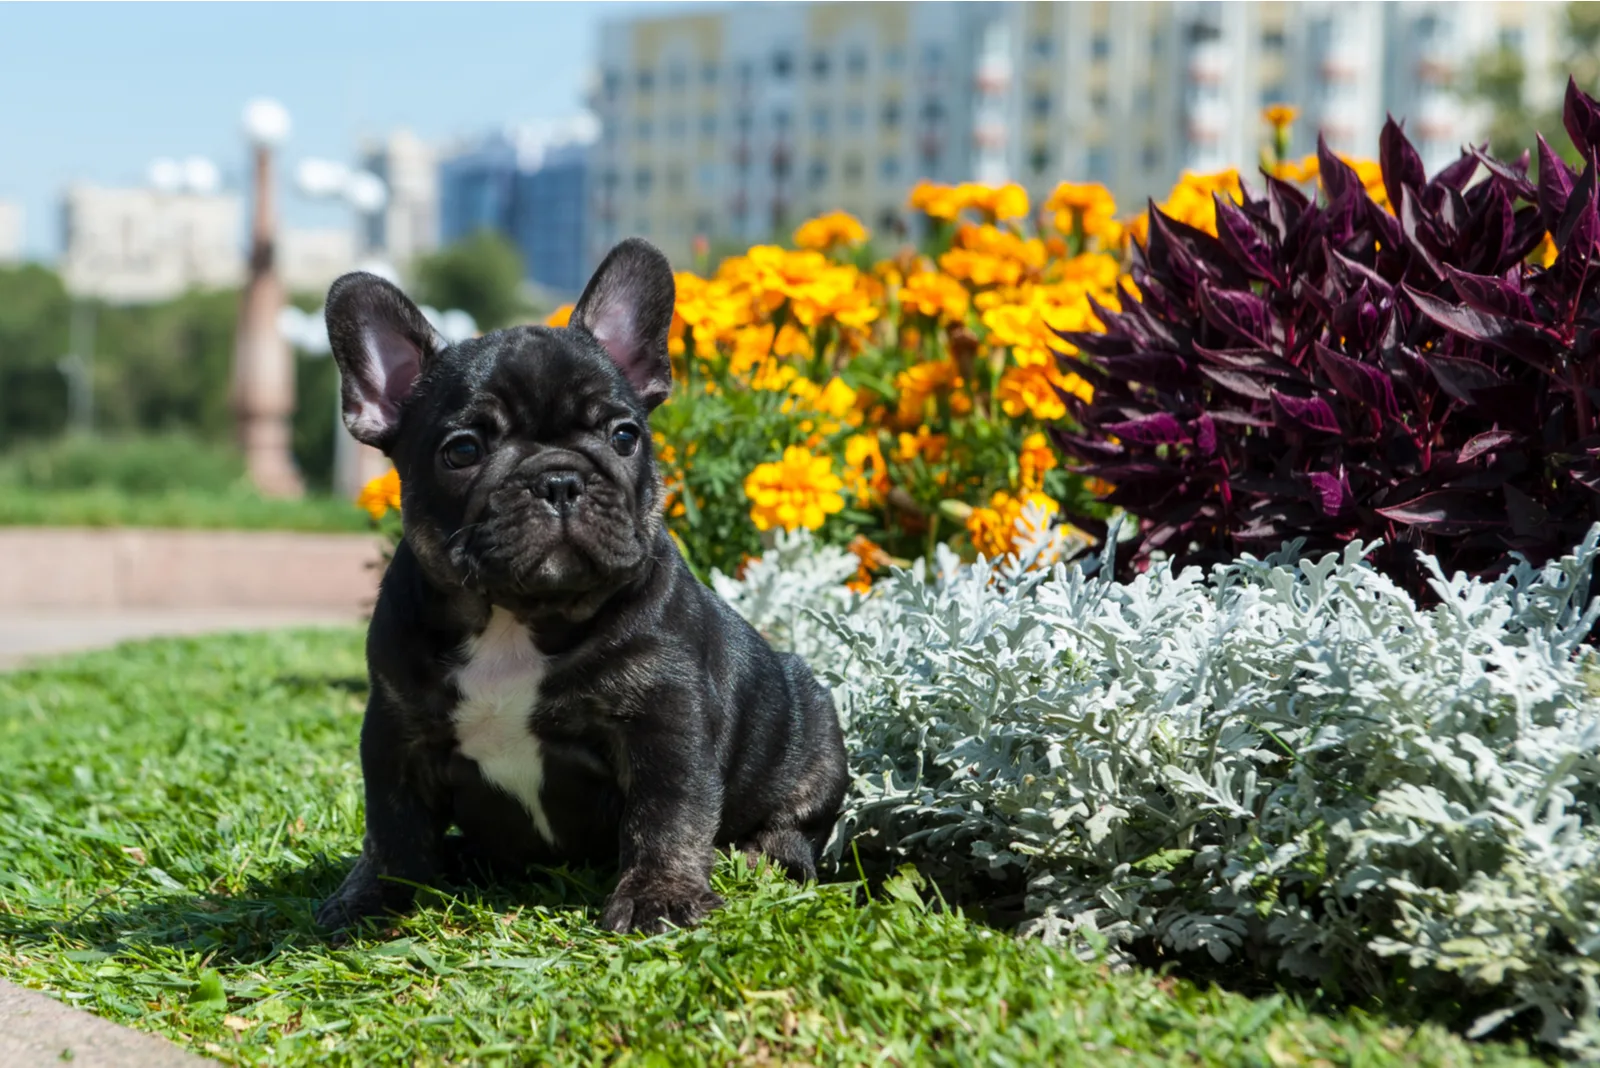 a French Bulldog puppy sits and looks around